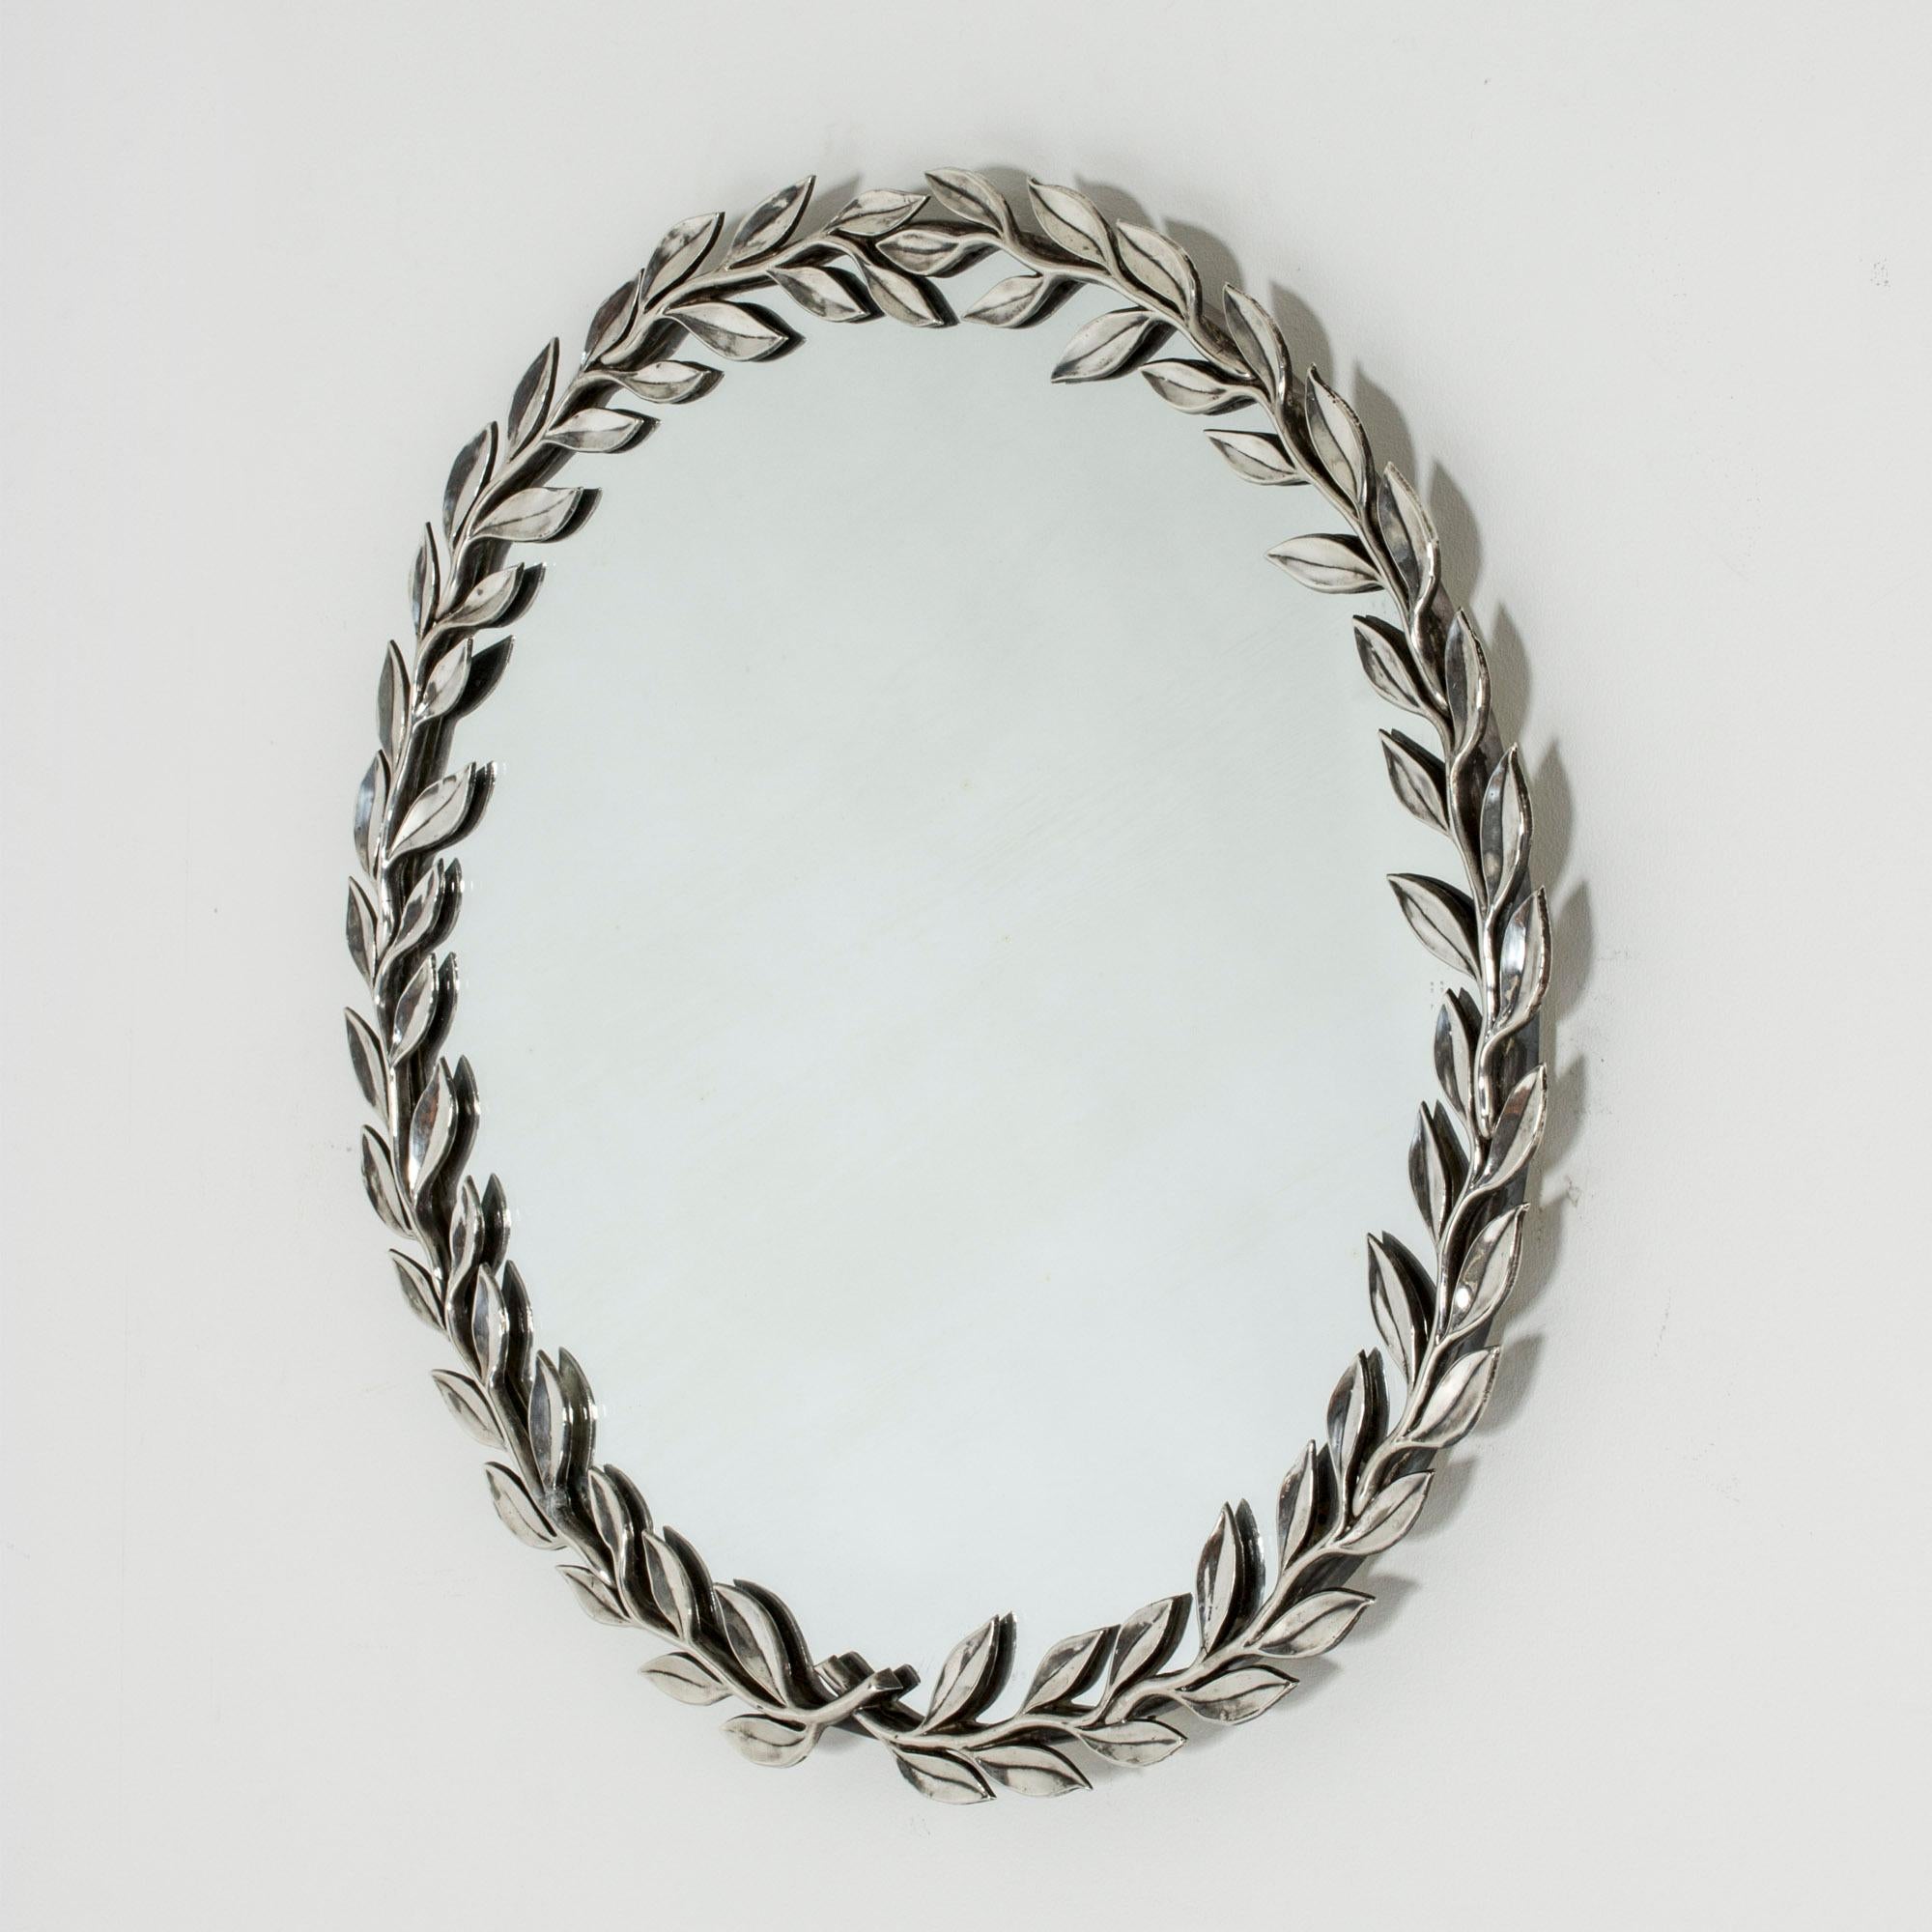 Stunning “Bay Leaf” wall mirror by Estrid Ericson, made from silver plated pewter. Can also be used as a table mirror.